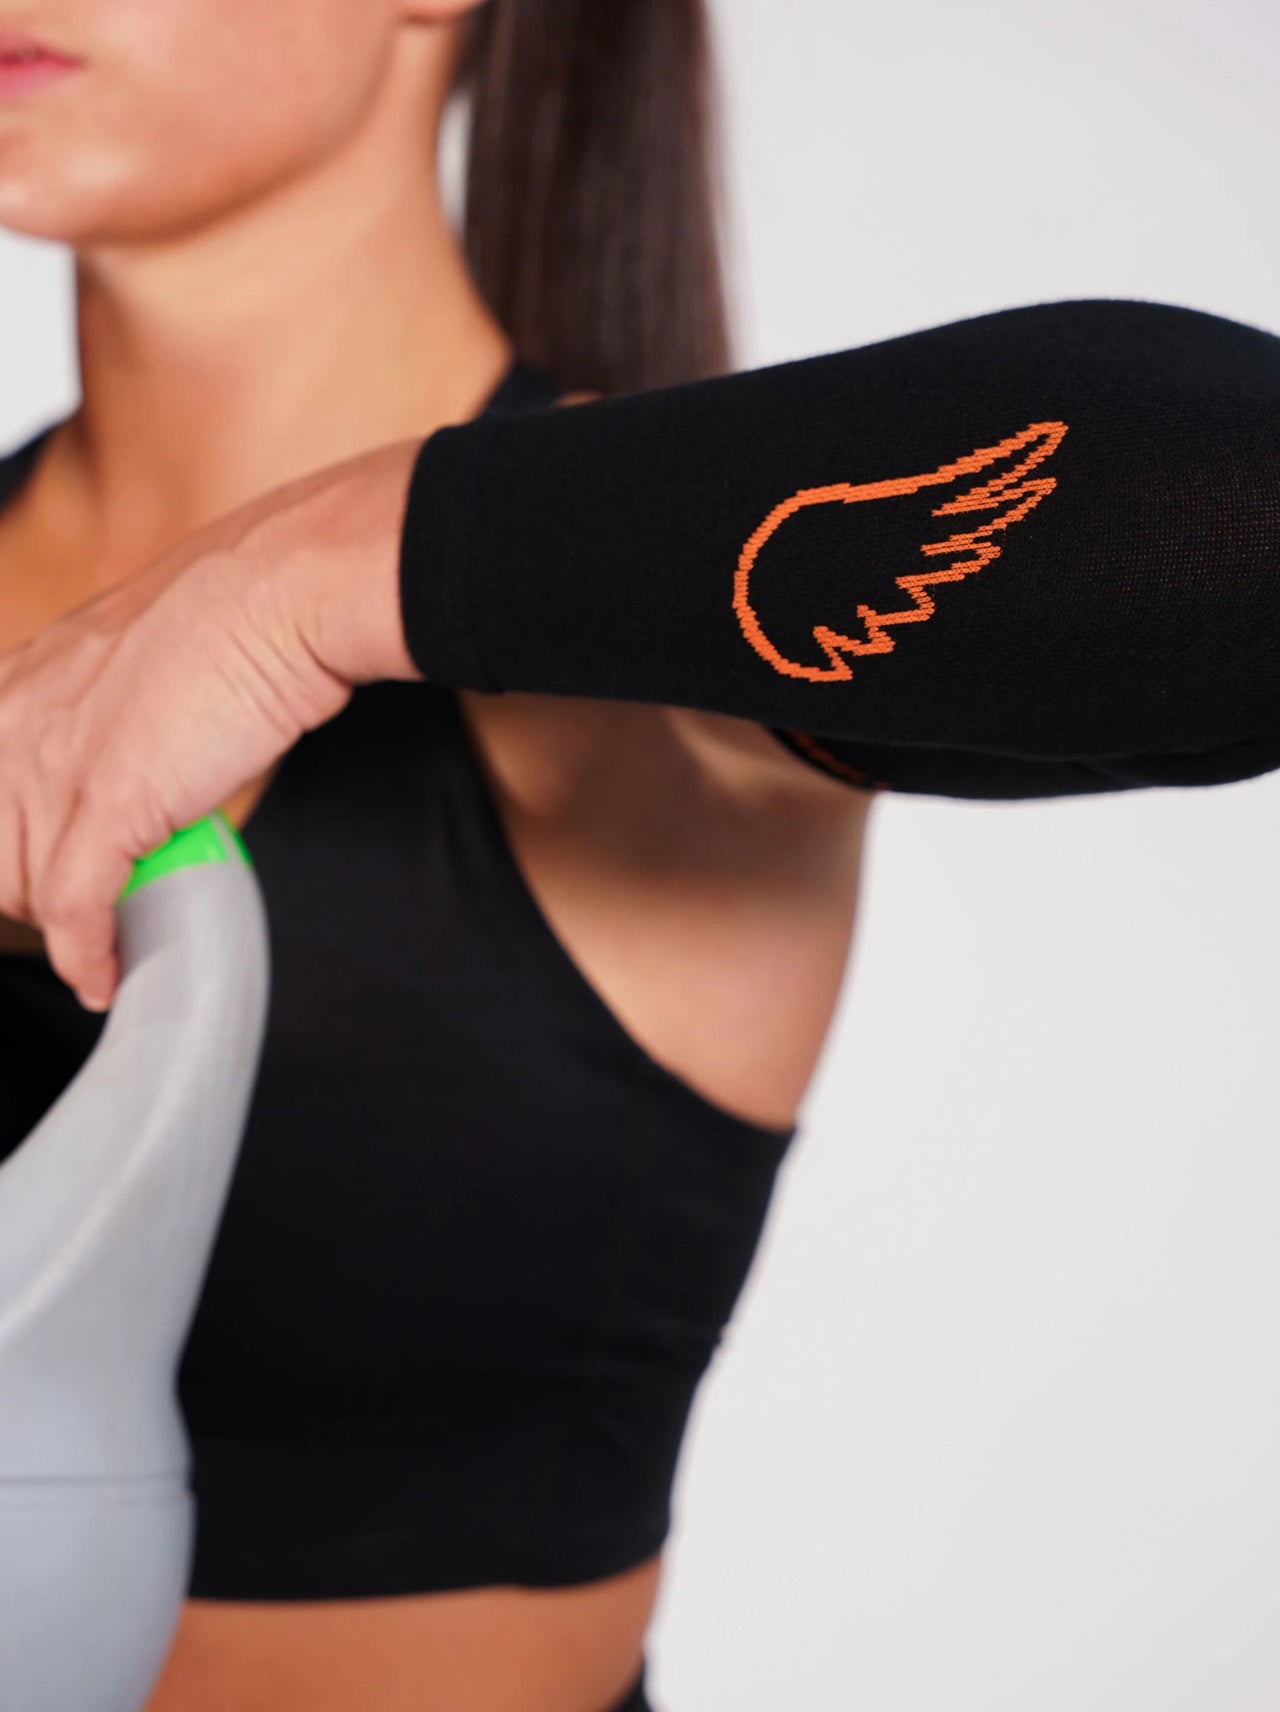 Unisex Anti-Fatigue & Recovery Compression Arm Sleeves